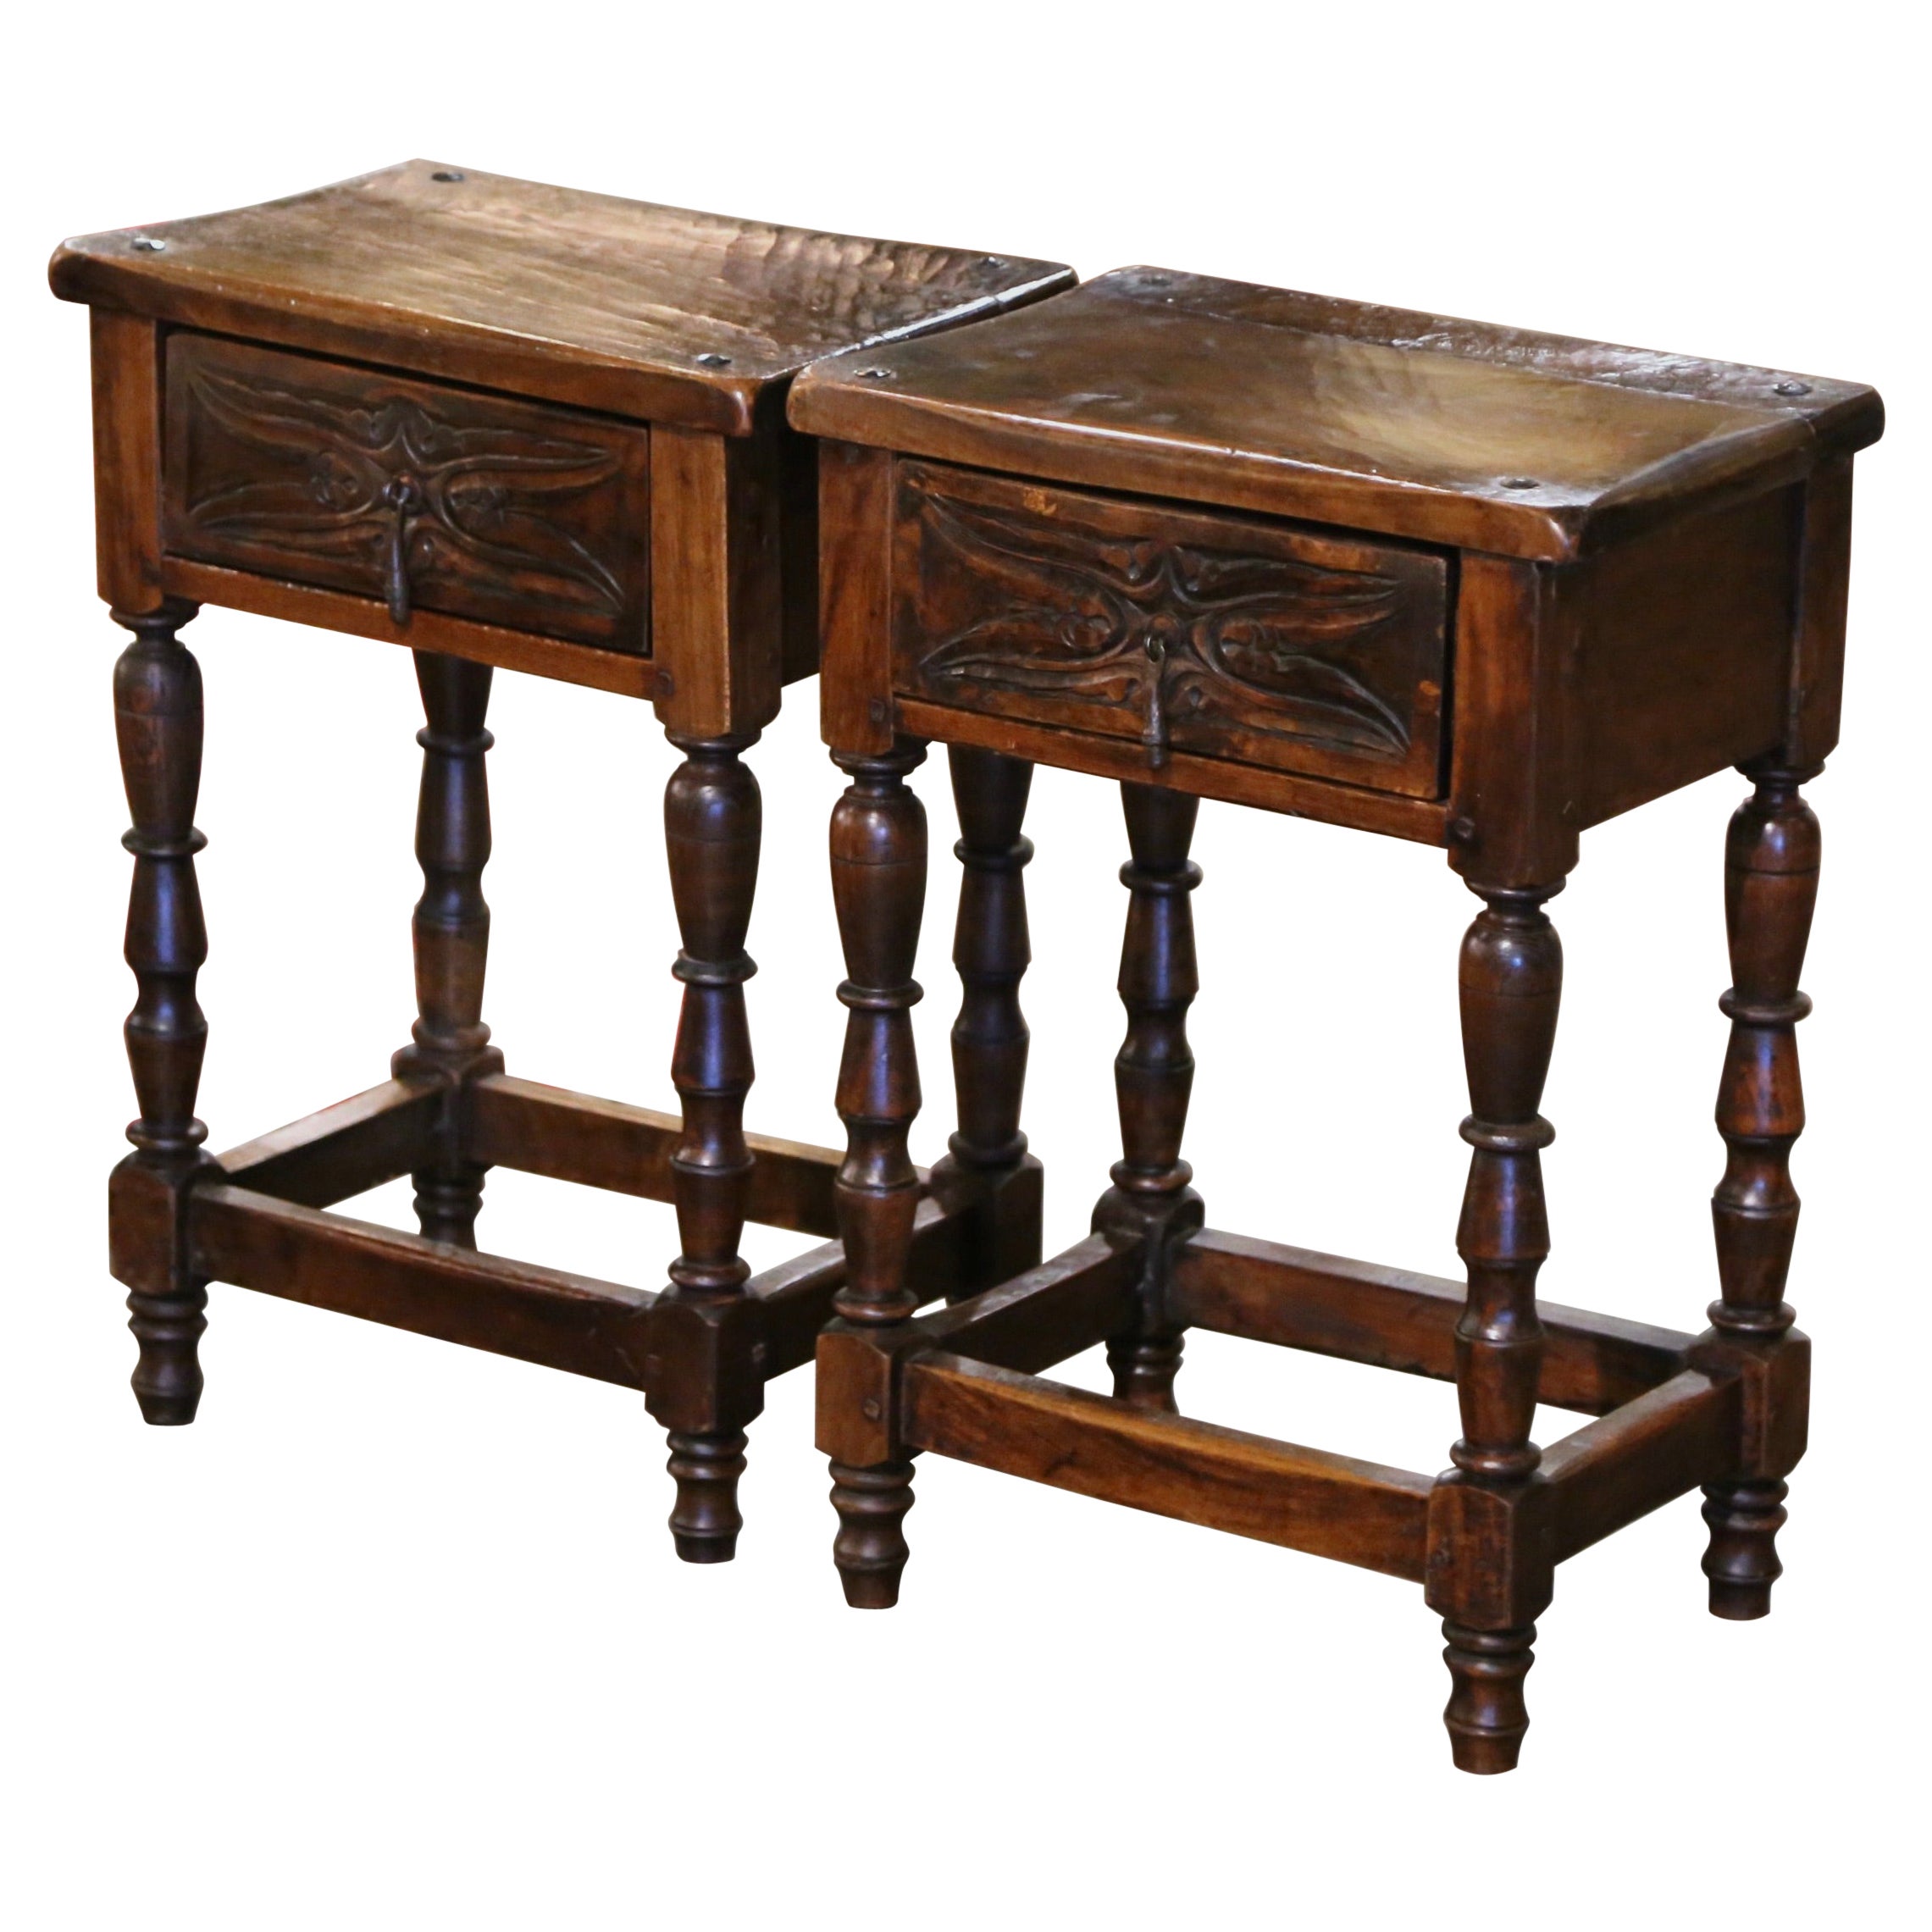 Pair of 19th Century Spanish Baroque Carved Walnut Side Tables